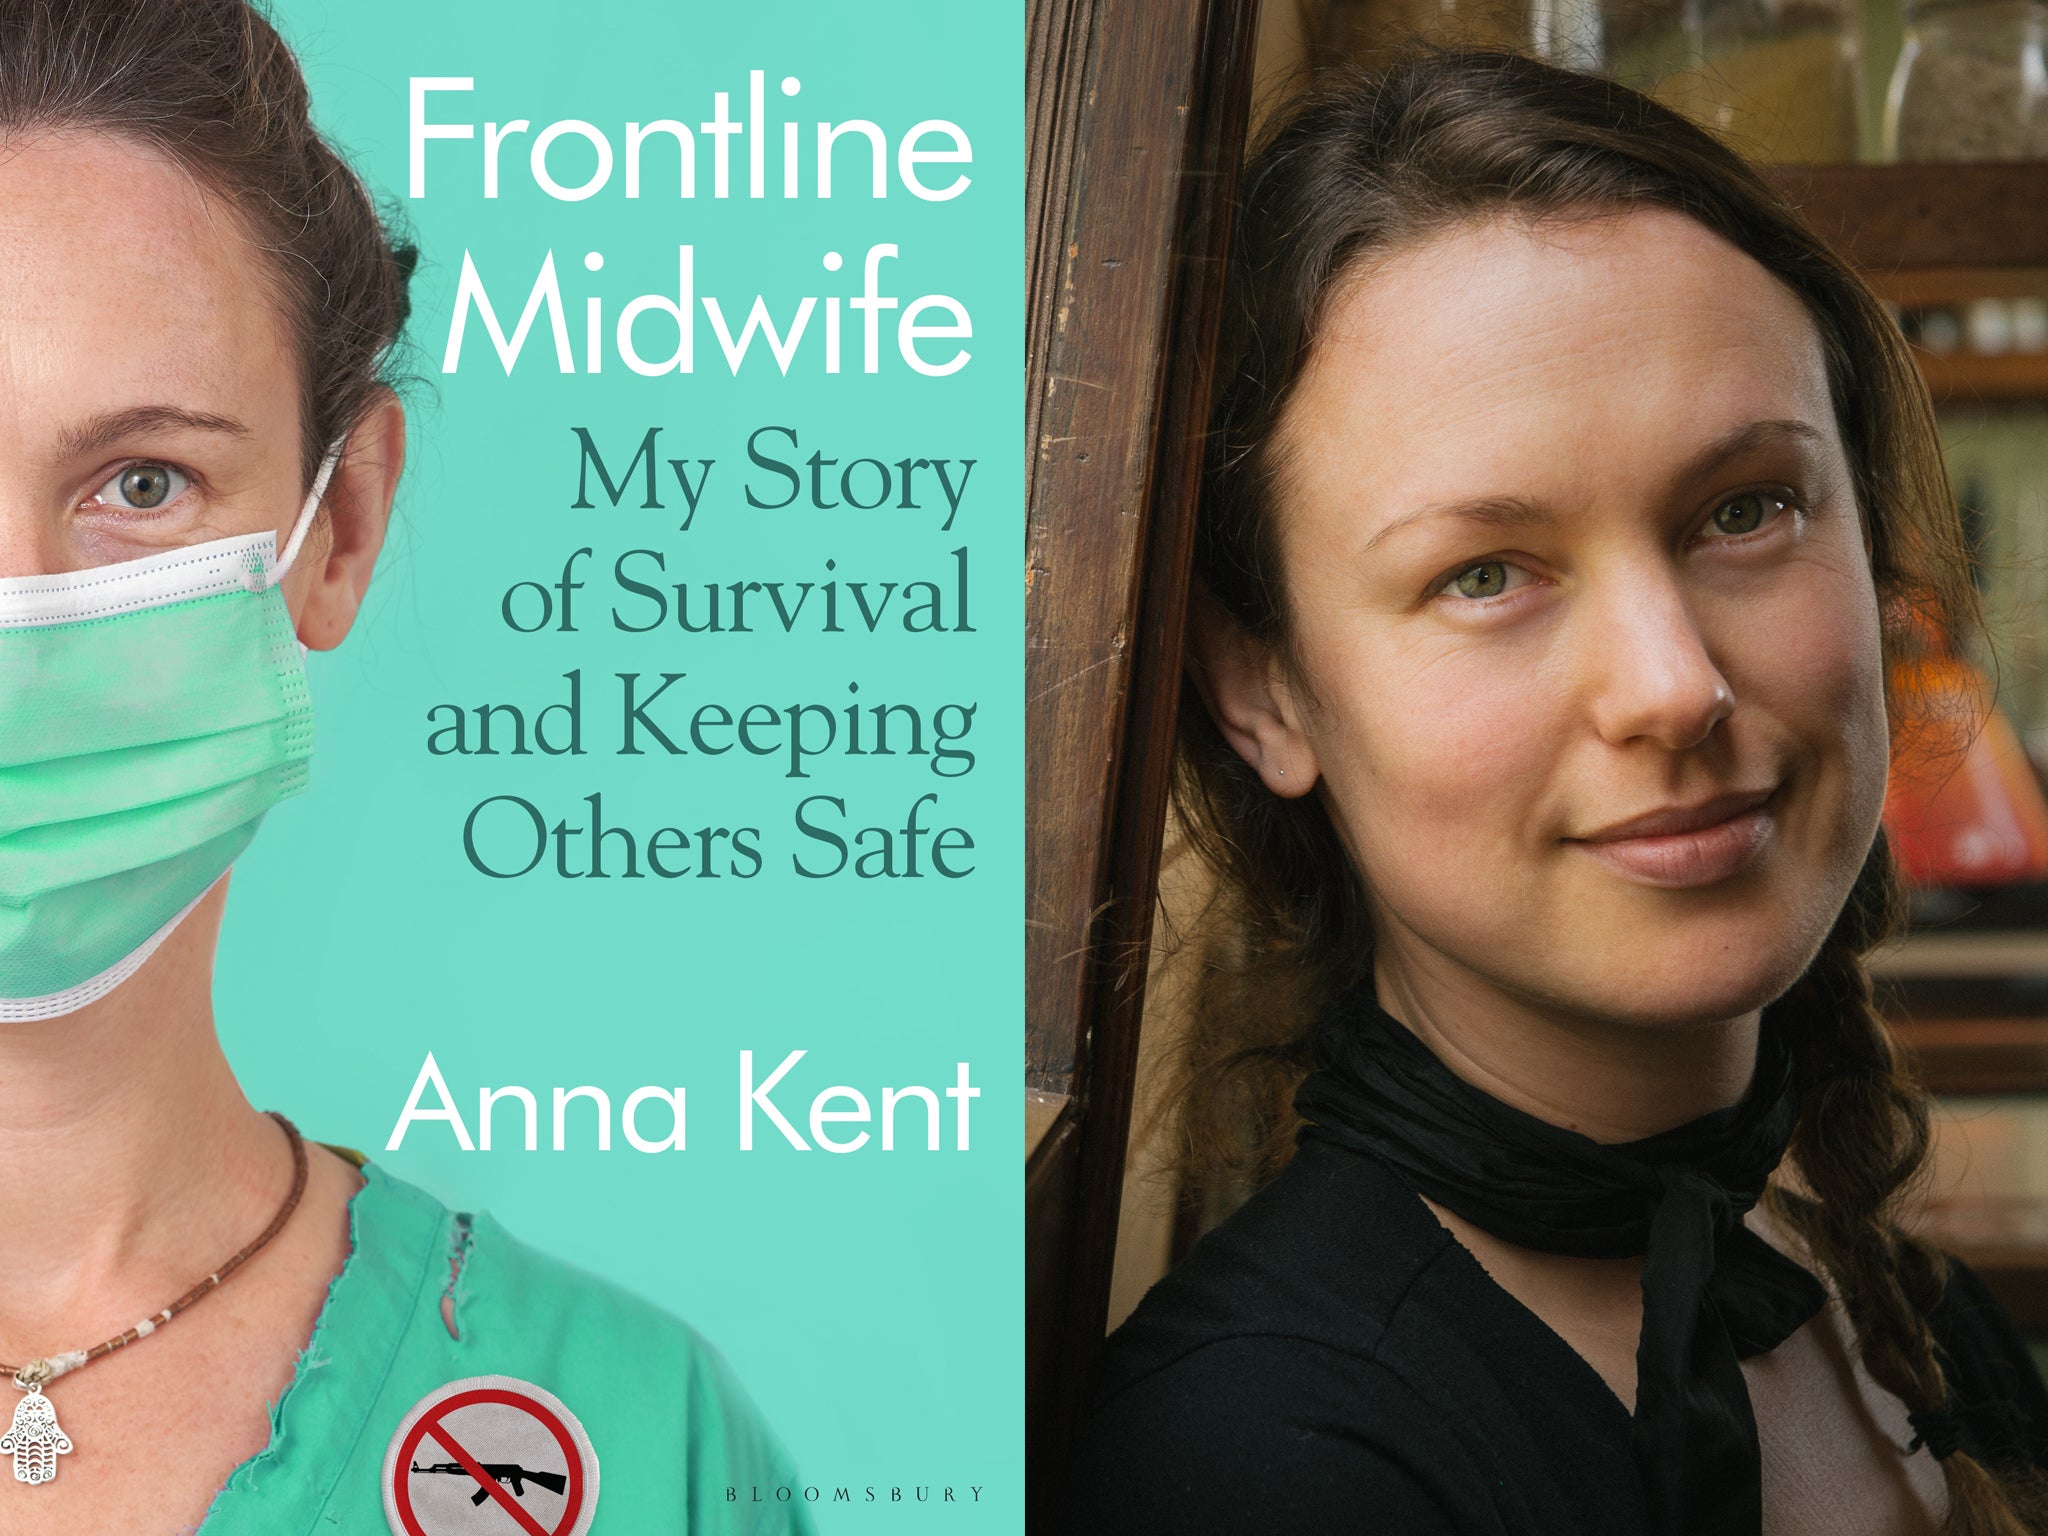 ‘Frontline Midwife’ is totally absorbing because Anna Kent holds nothing back, including about her own tragic experiences of miscarriage and loss